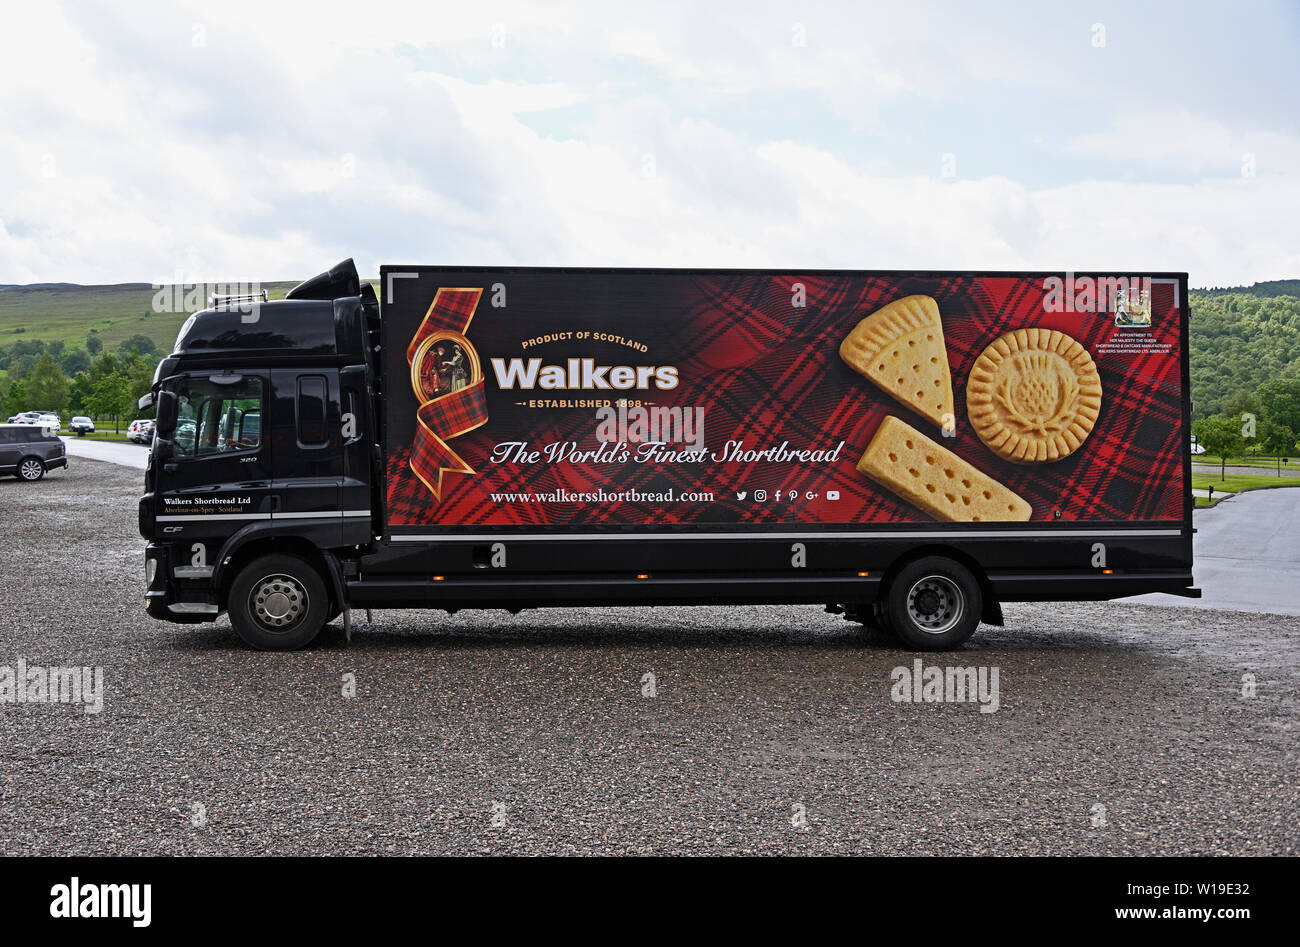 Walkers Shortbread Limited HGV. The World's Finest Shortbread. House of Bruar, Blair Atholl, Perth and Kinross, Scotland, United Kingdom, Europe. Stock Photo